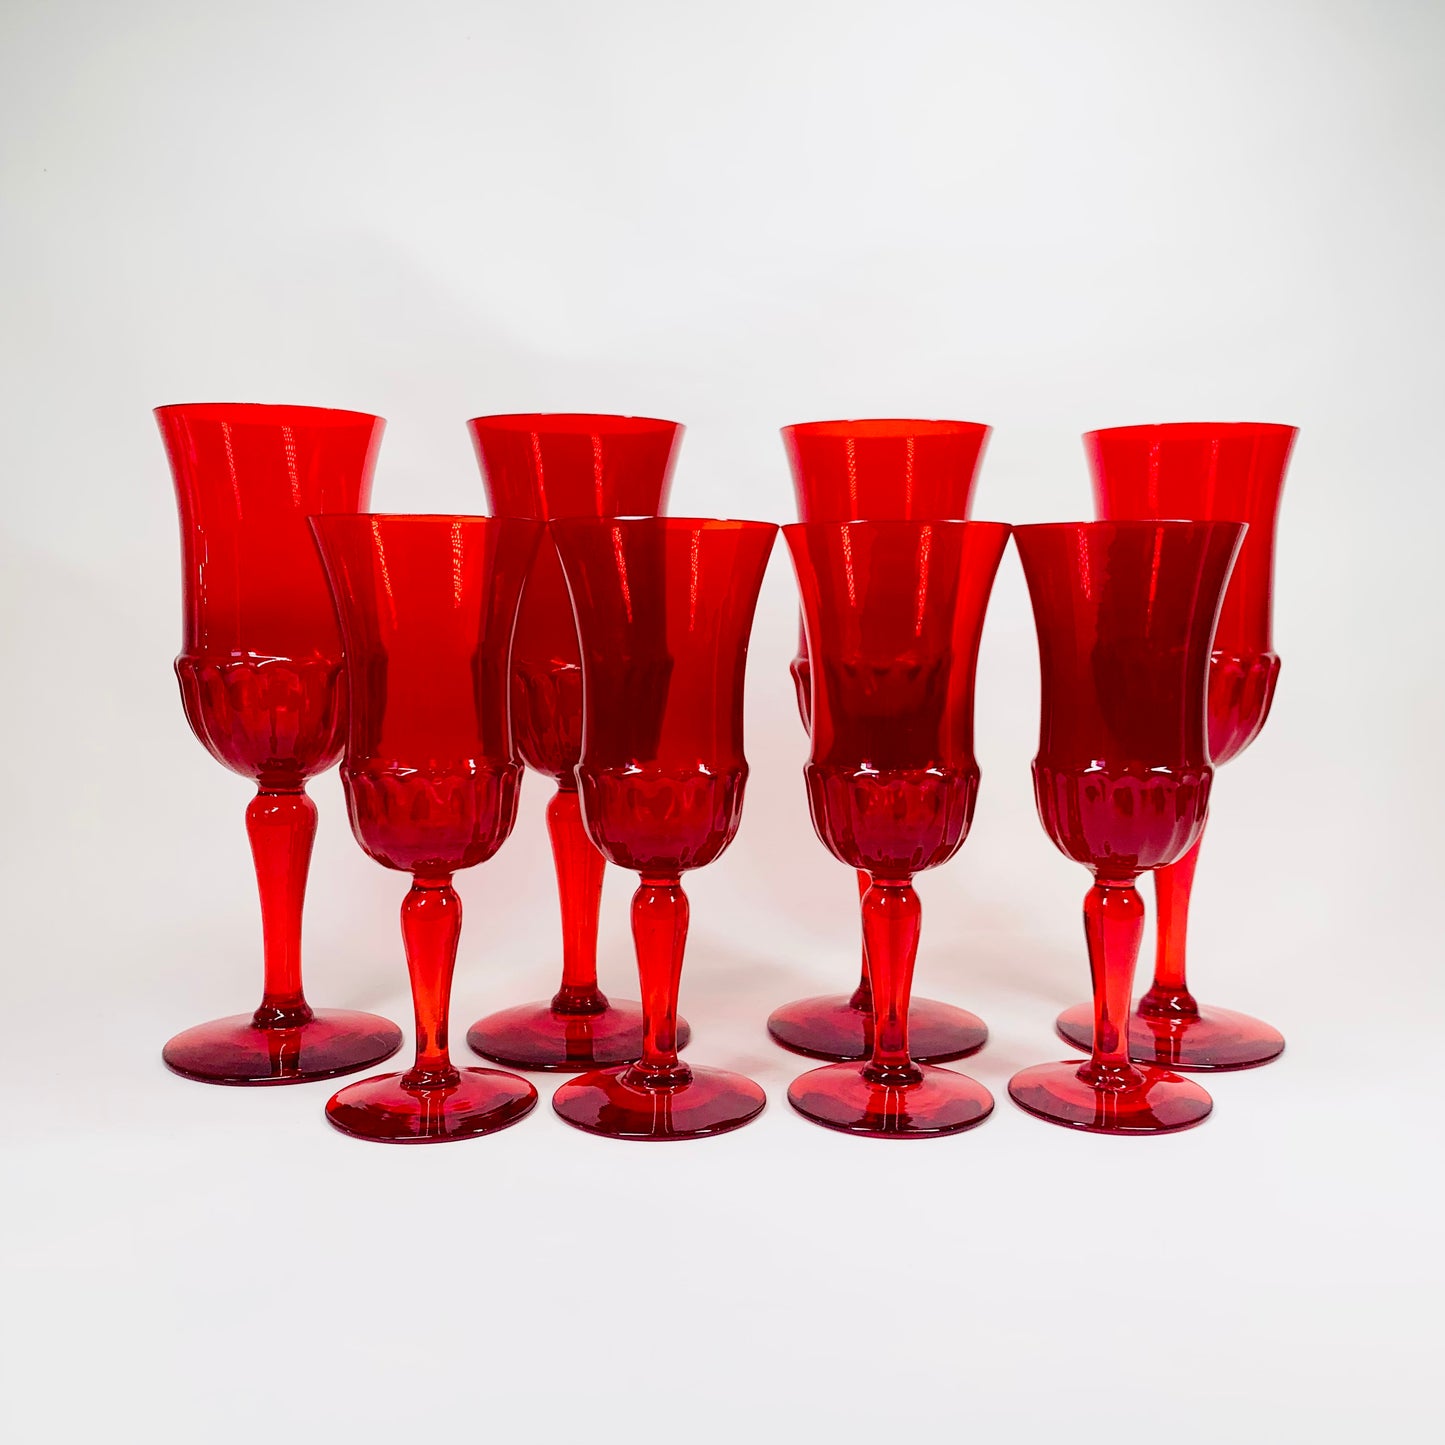 Extremely rare Midcentury French ruby glass goblets